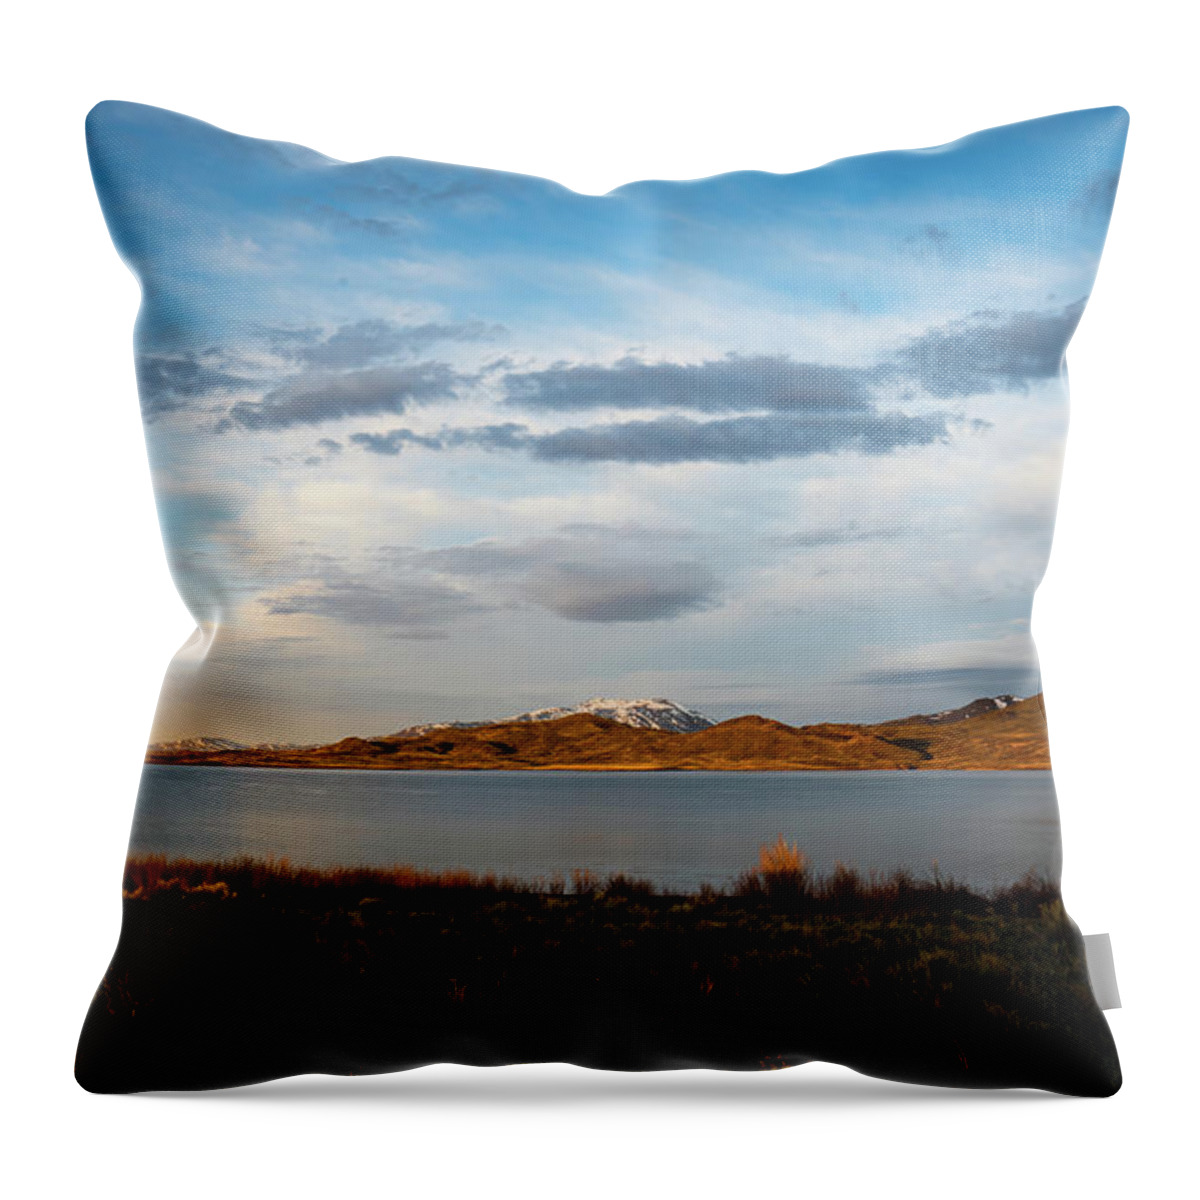 Sunrise Throw Pillow featuring the photograph Morning at Wildhorse Reservoir by Ron Long Ltd Photography